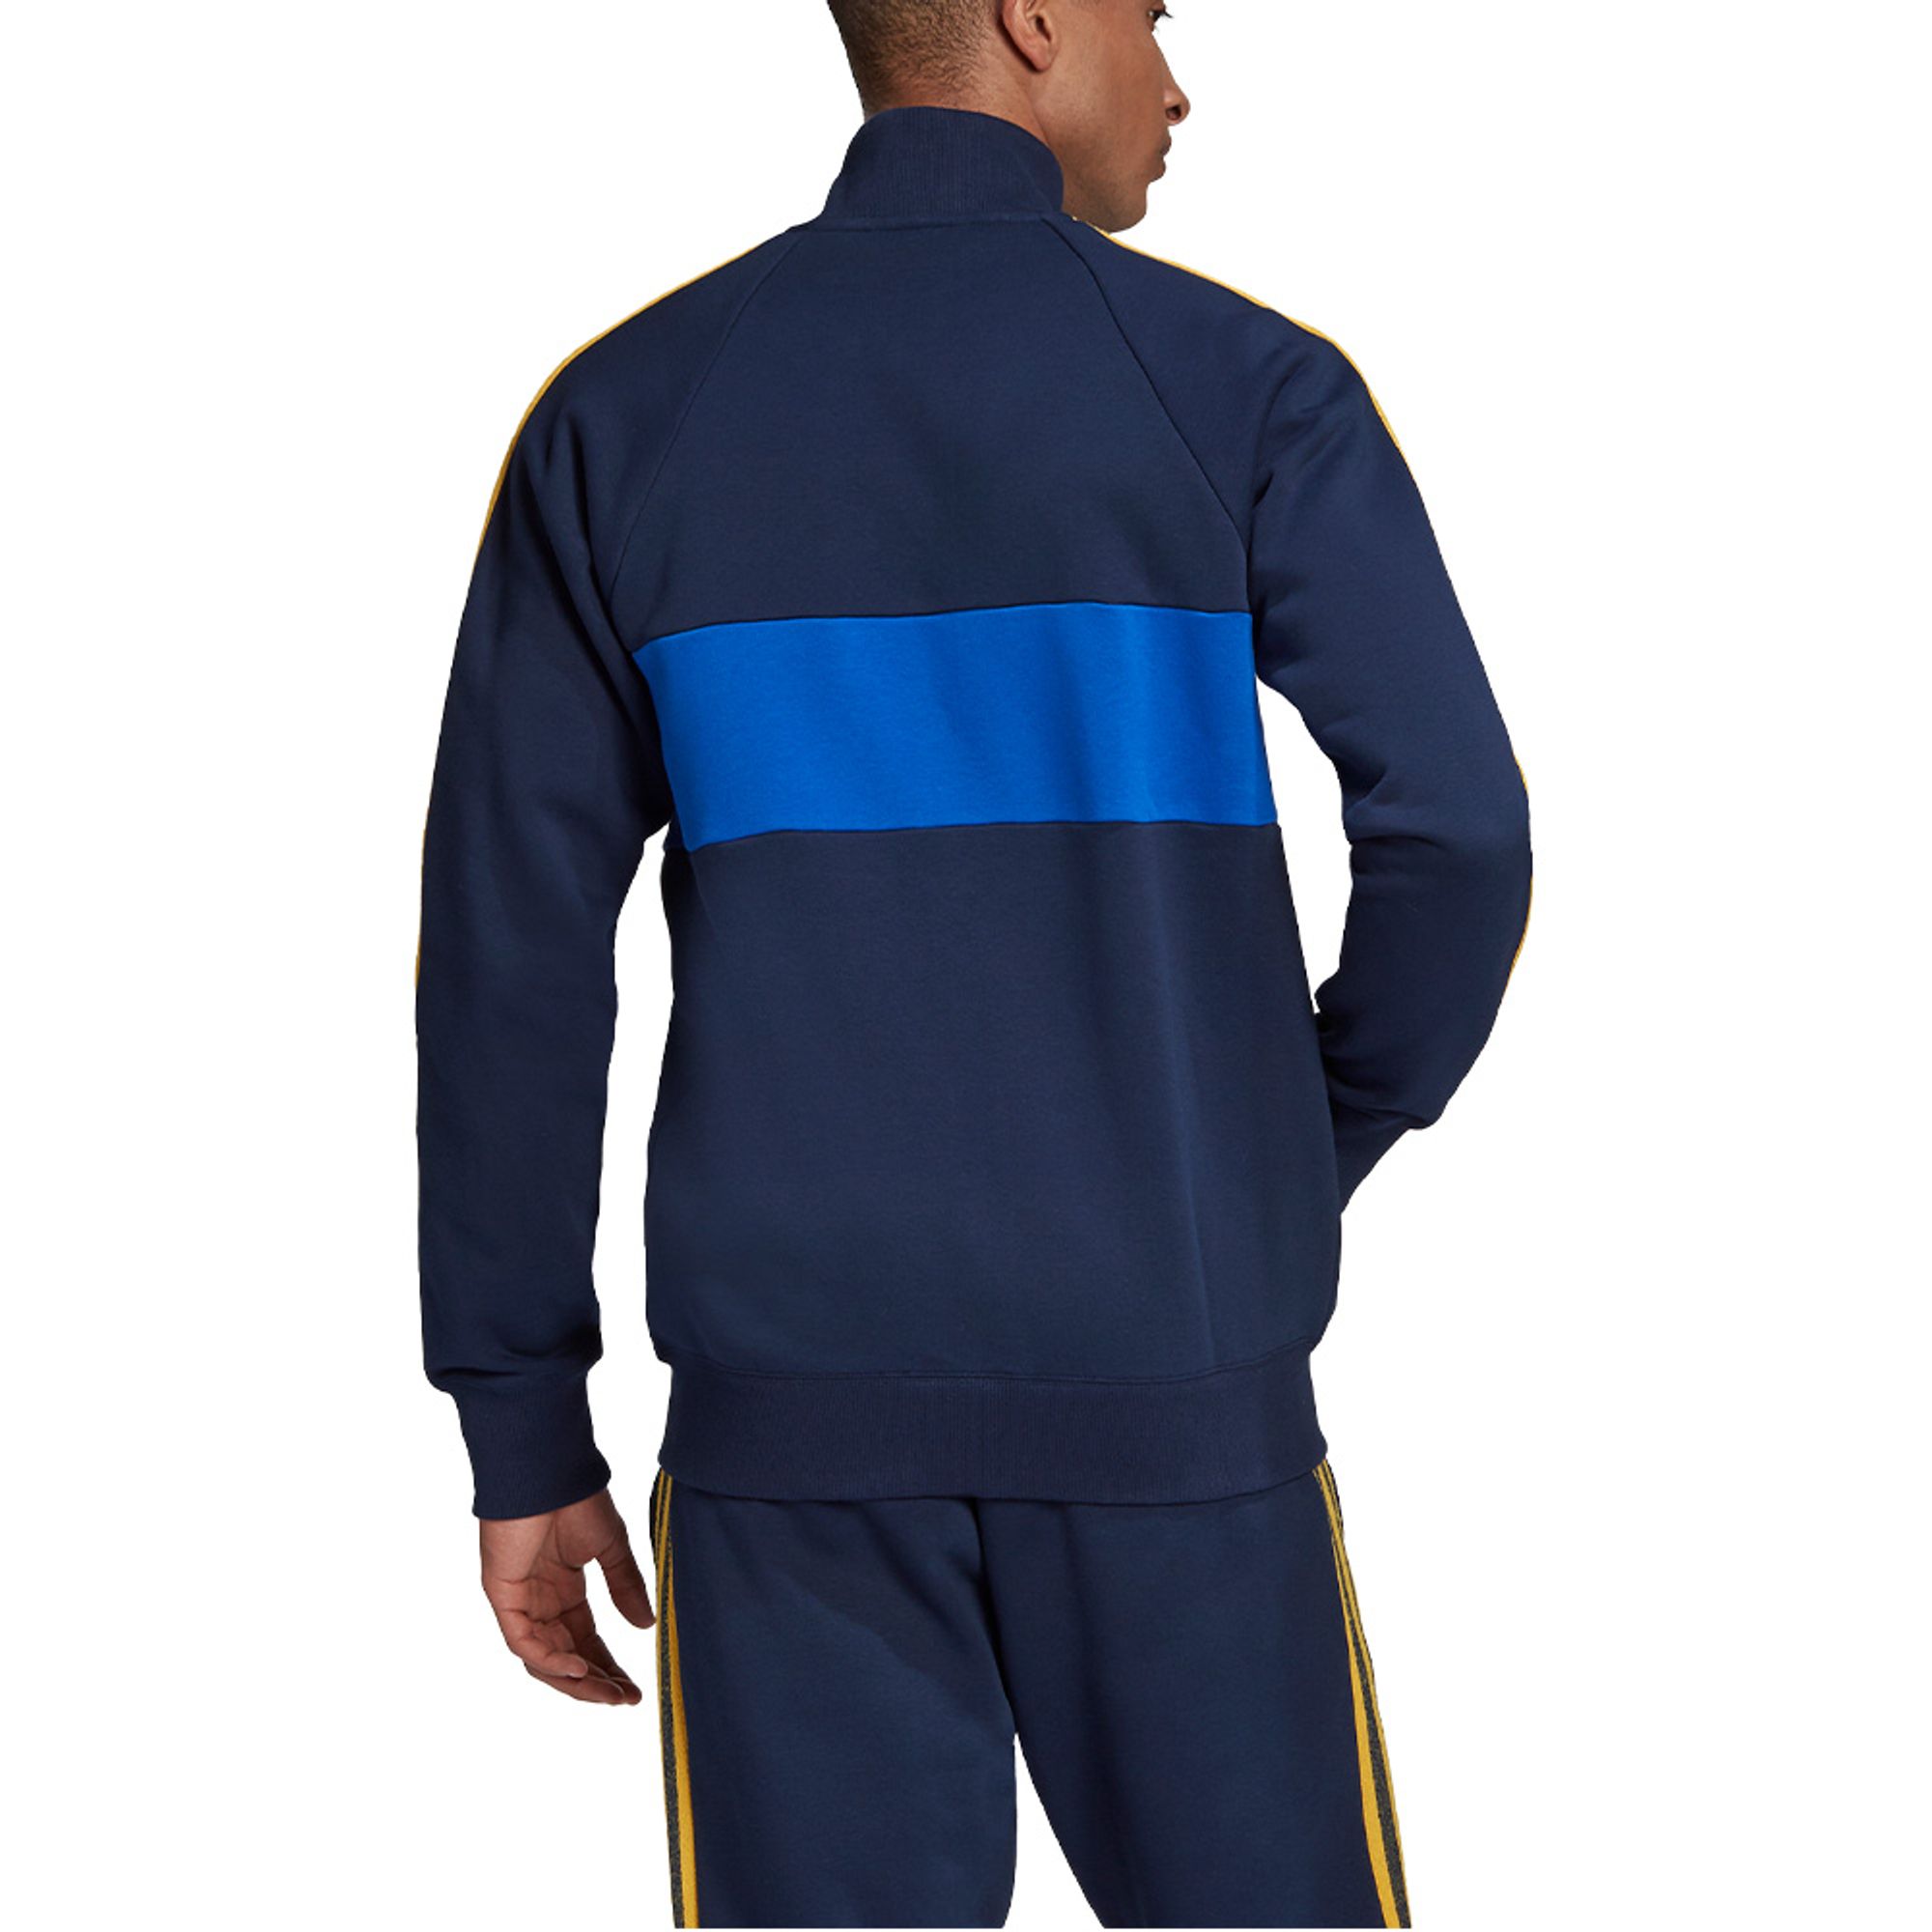 Exclamation point Anyways manager CAMPERA ADIDAS BOCA JUNIORS ICONS TOP - redsport